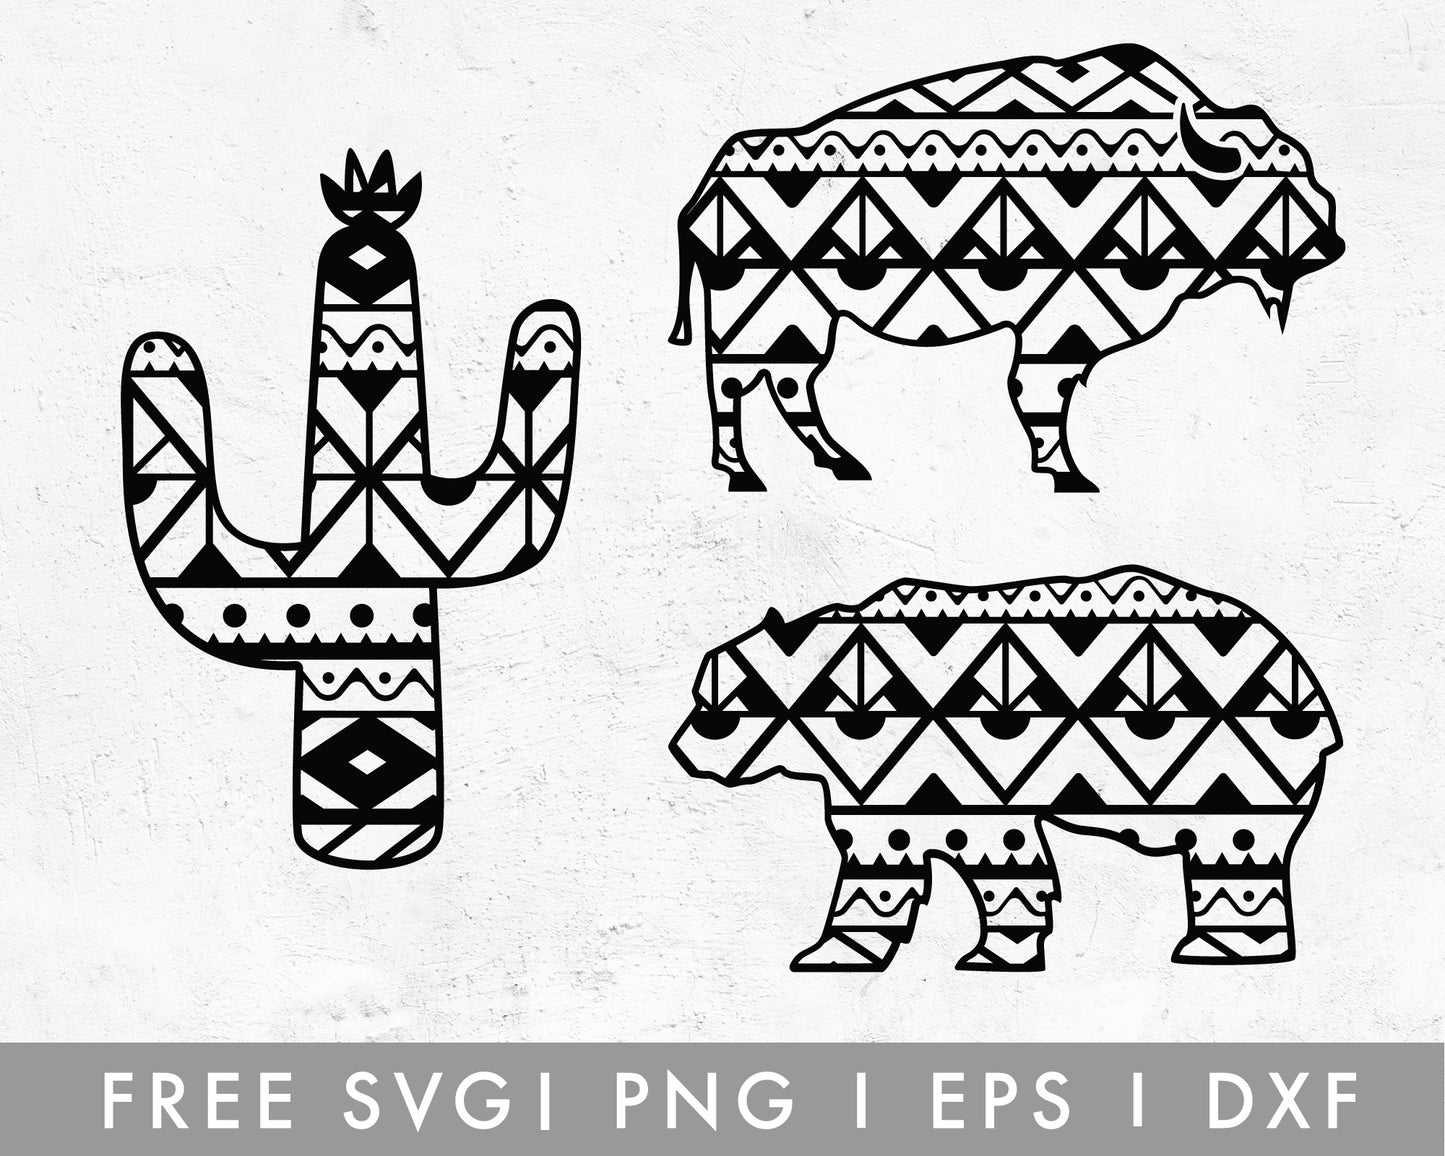 FREE Boho Southern Elements SVG Cut File for Cricut, Cameo Silhouette | Free SVG Cut File